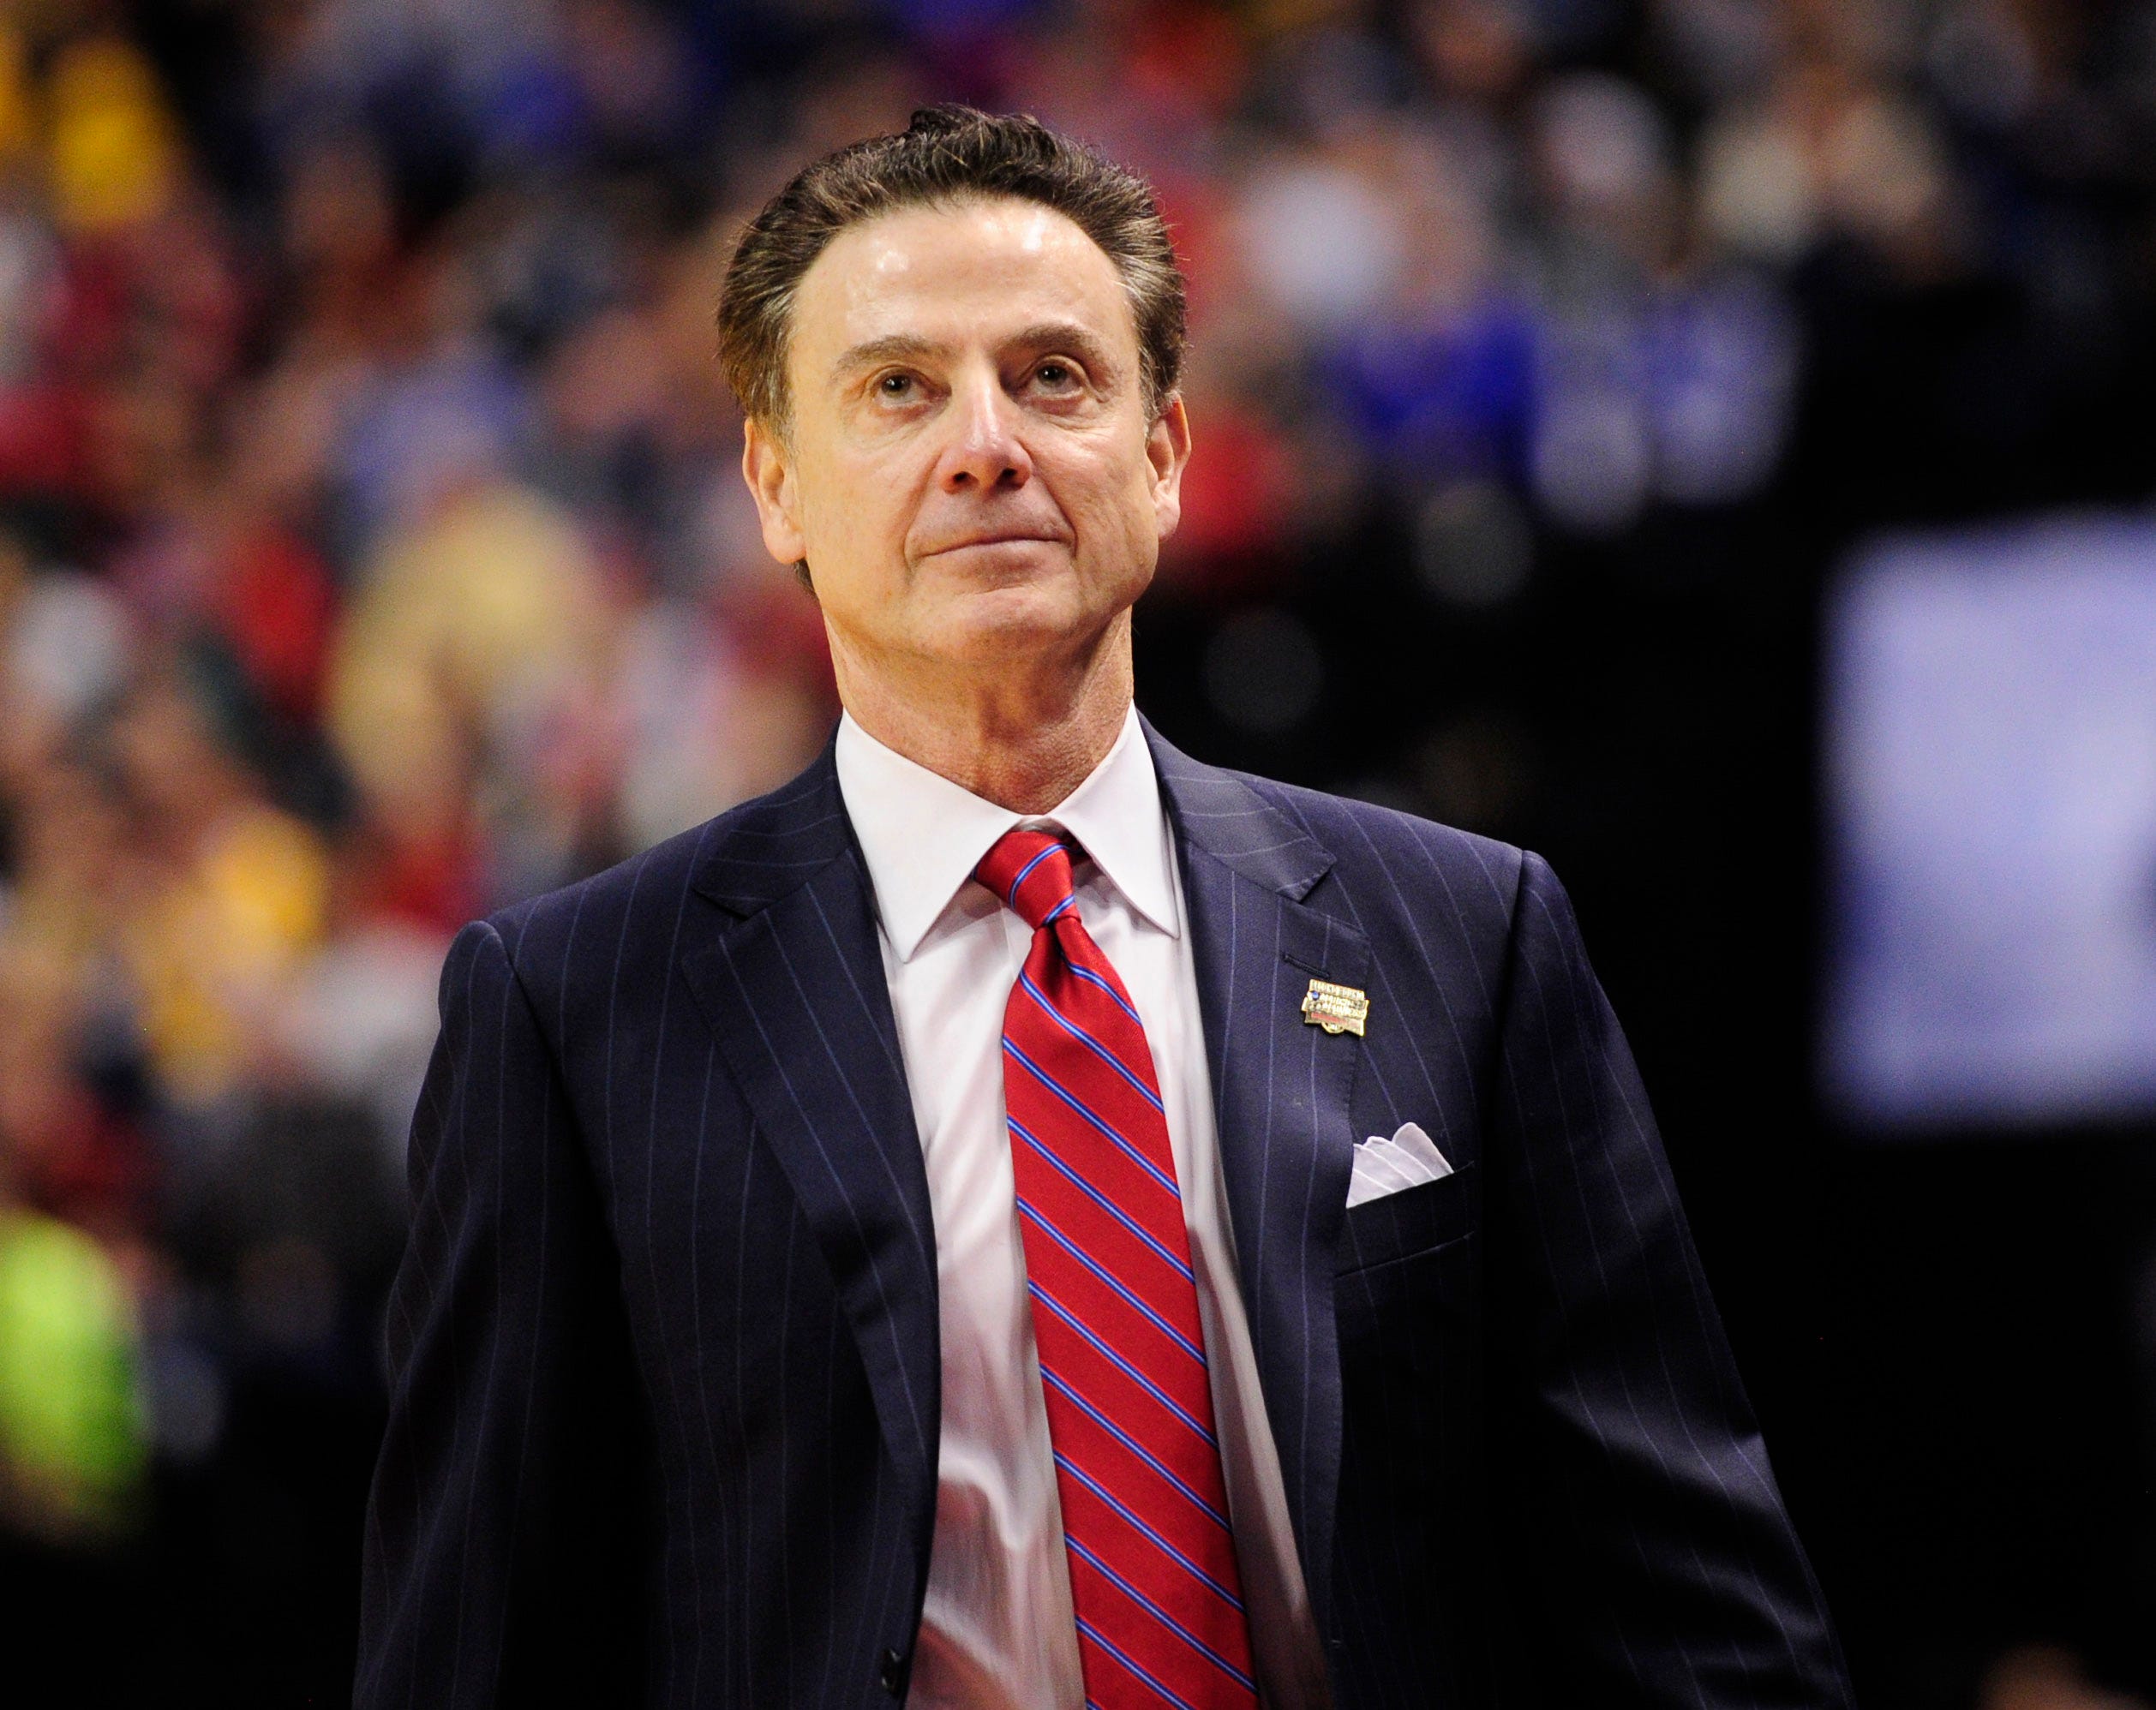 The 71-year old son of father Seb Sarkisian and mother Sally Sarkisian Rick Pitino in 2023 photo. Rick Pitino earned a 7.7 million dollar salary - leaving the net worth at  million in 2023